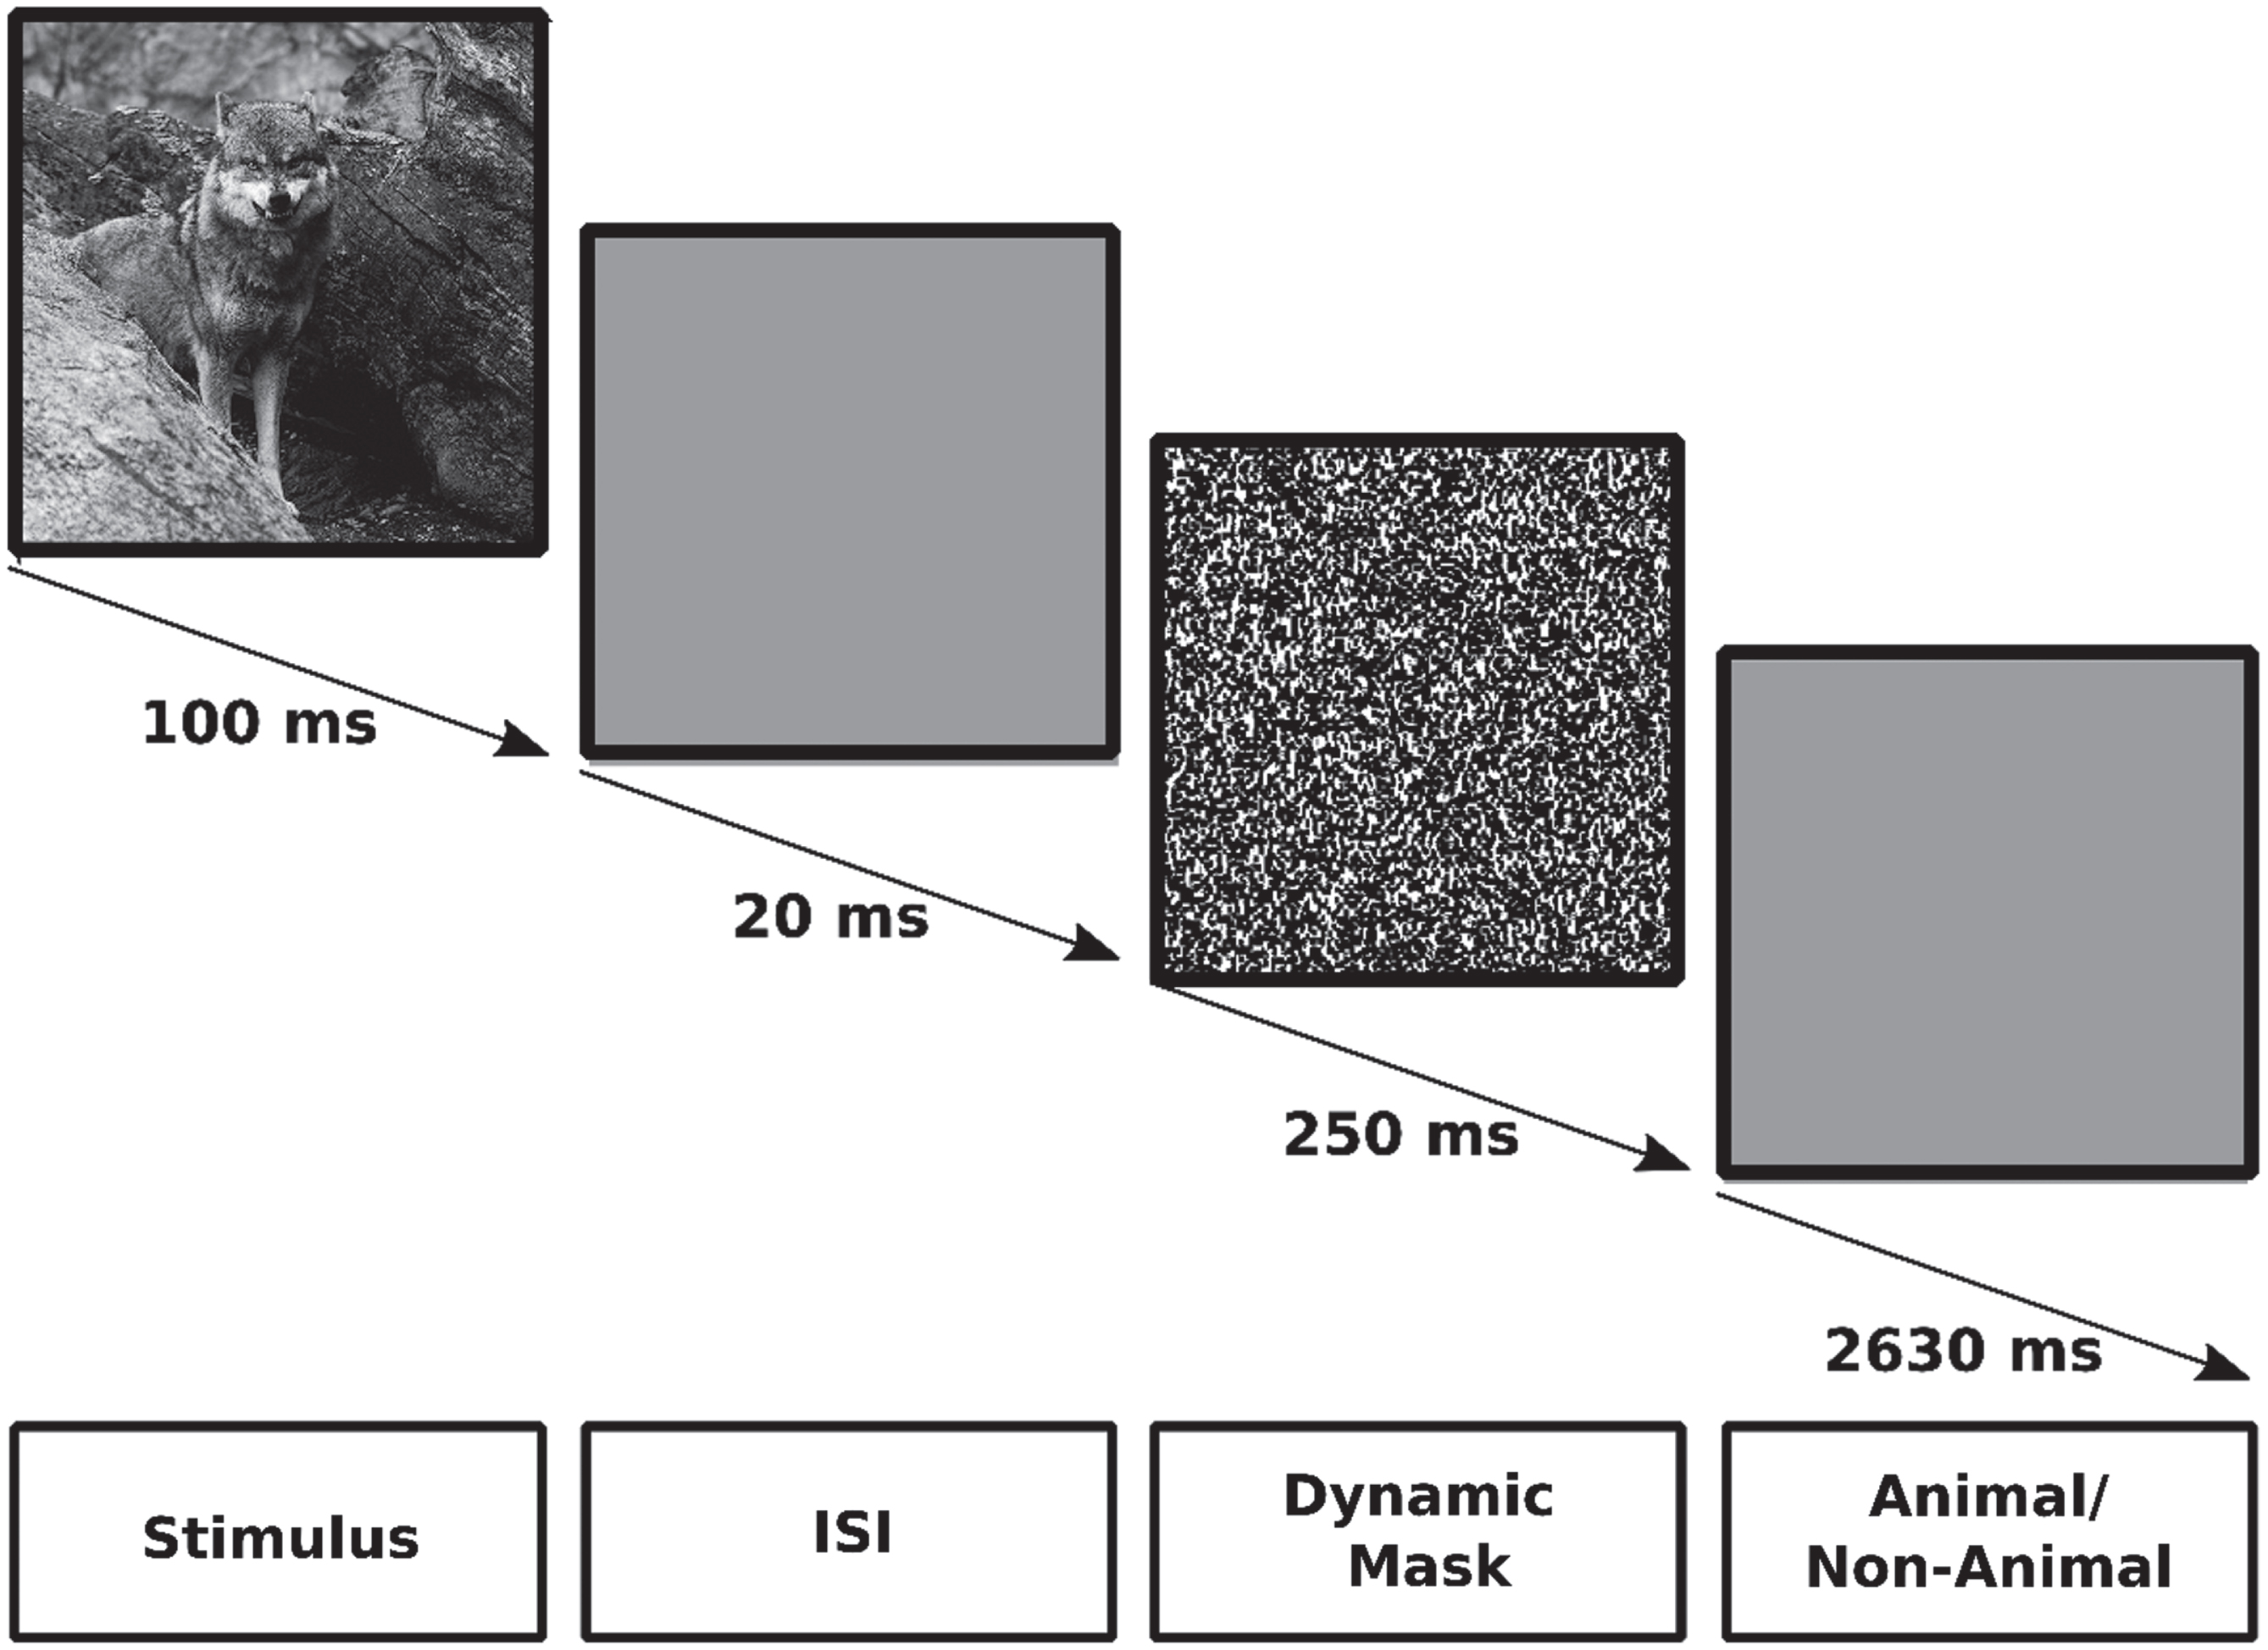 The ICA test. Each trial was shown for 100 ms, followed by a 20 ms inter-stimulus interval (ISI), followed by a 250 ms dynamic mask, followed by a 2630 ms response time in which participants should decide if there was an animal in the presenting image or not.